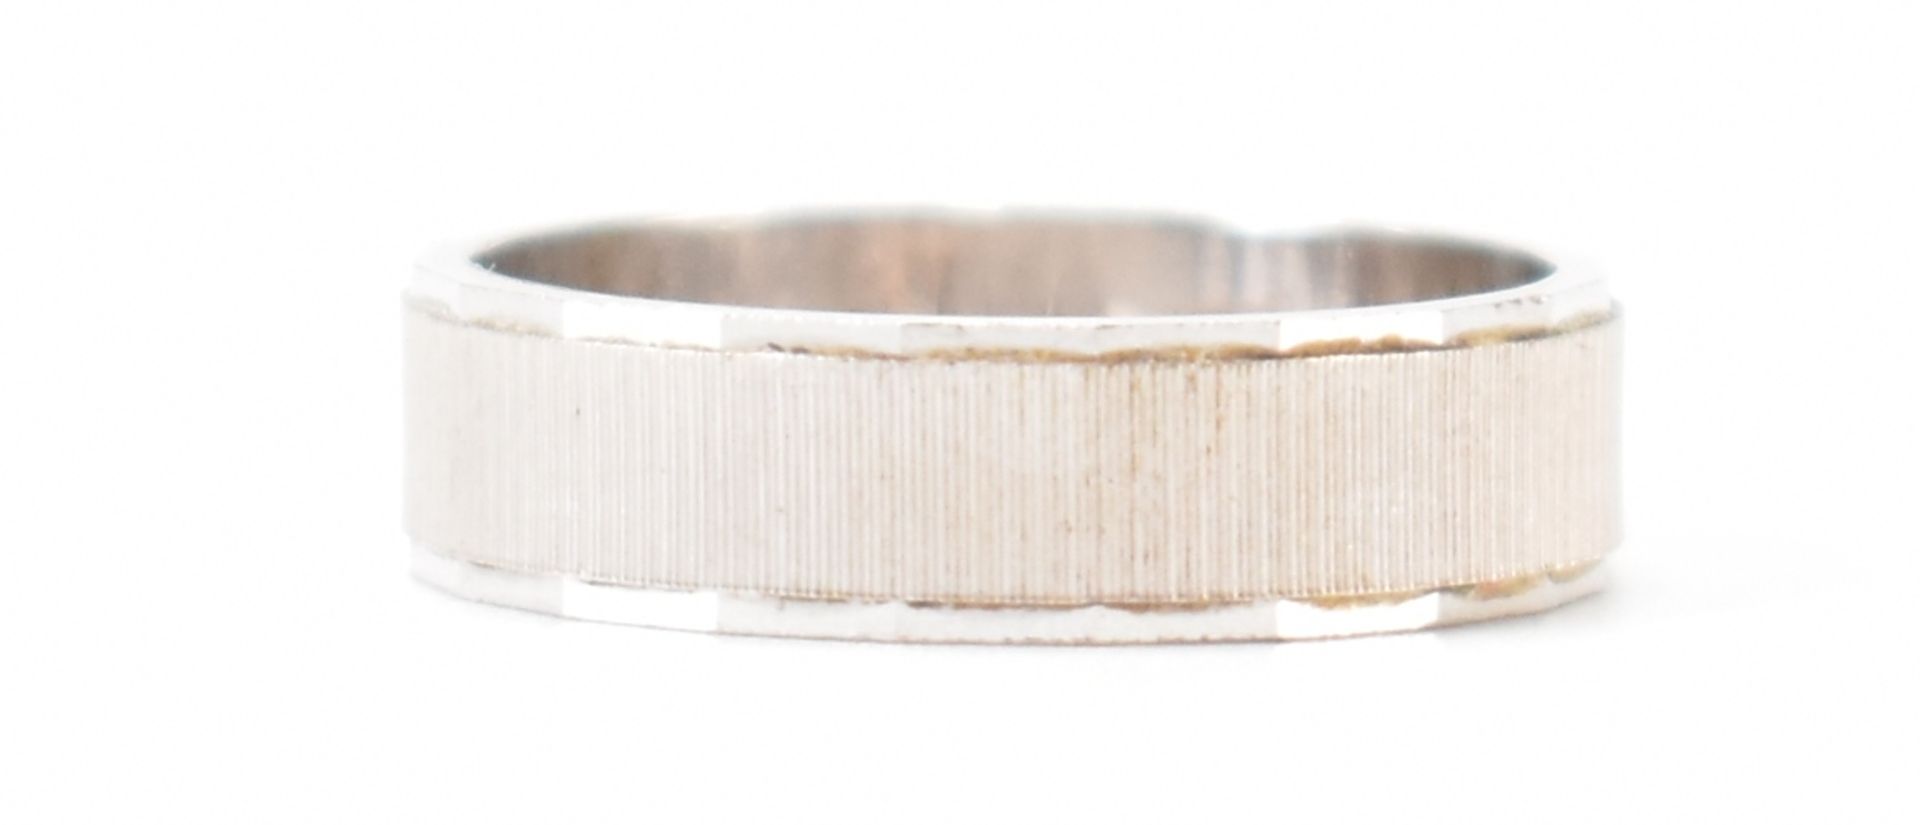 18CT WHITE GOLD TEXTURED BAND RING - Image 3 of 9